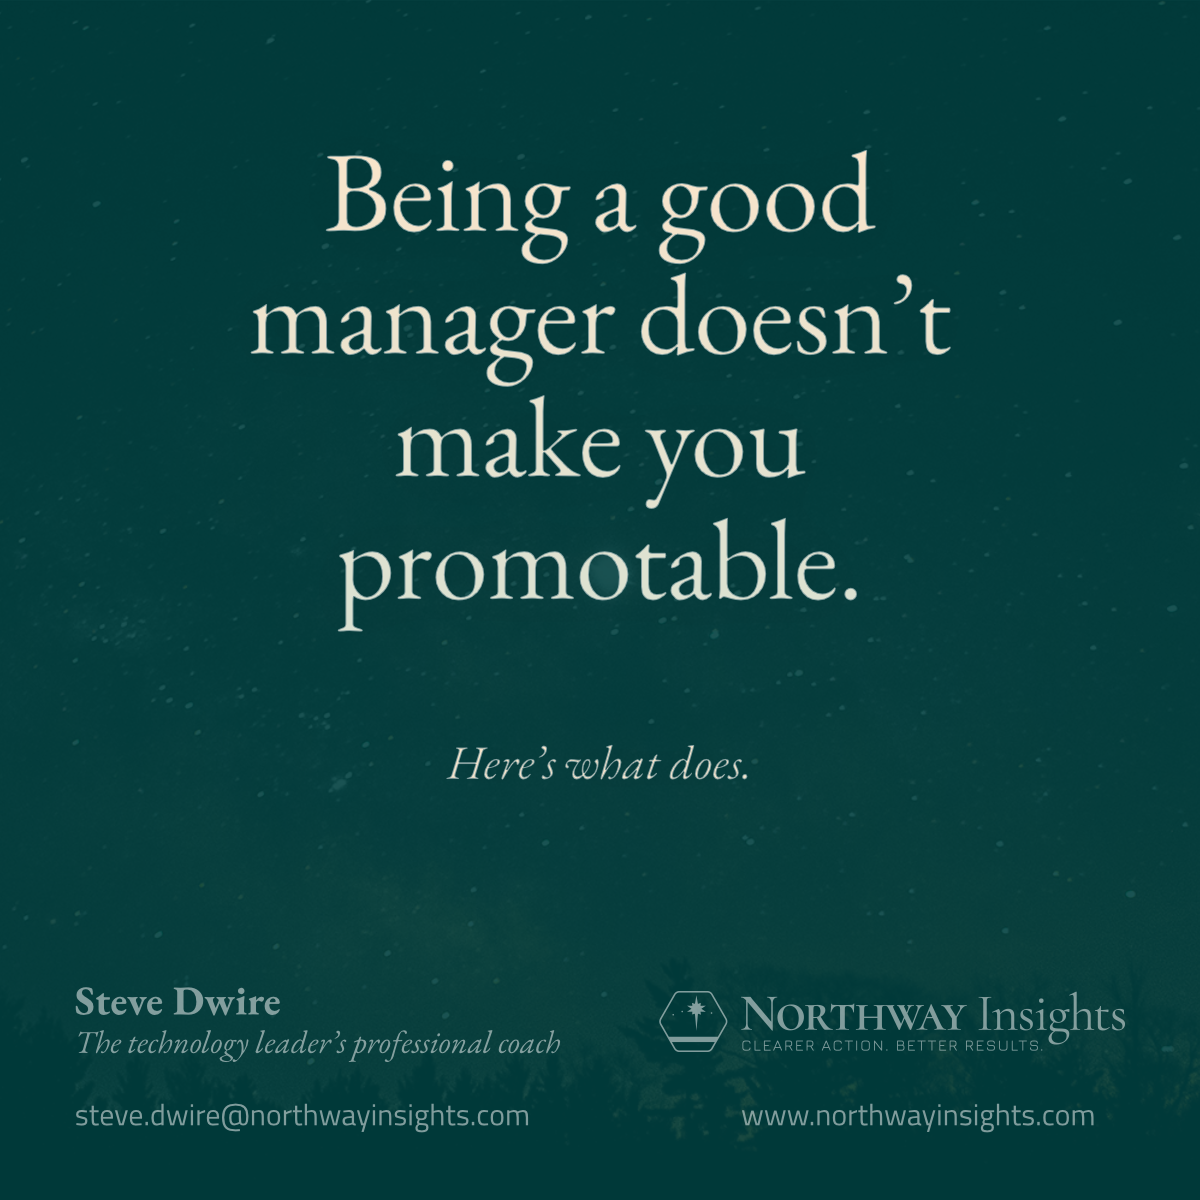 Being a good manager doesn't make you promotable. (Here's what does.)